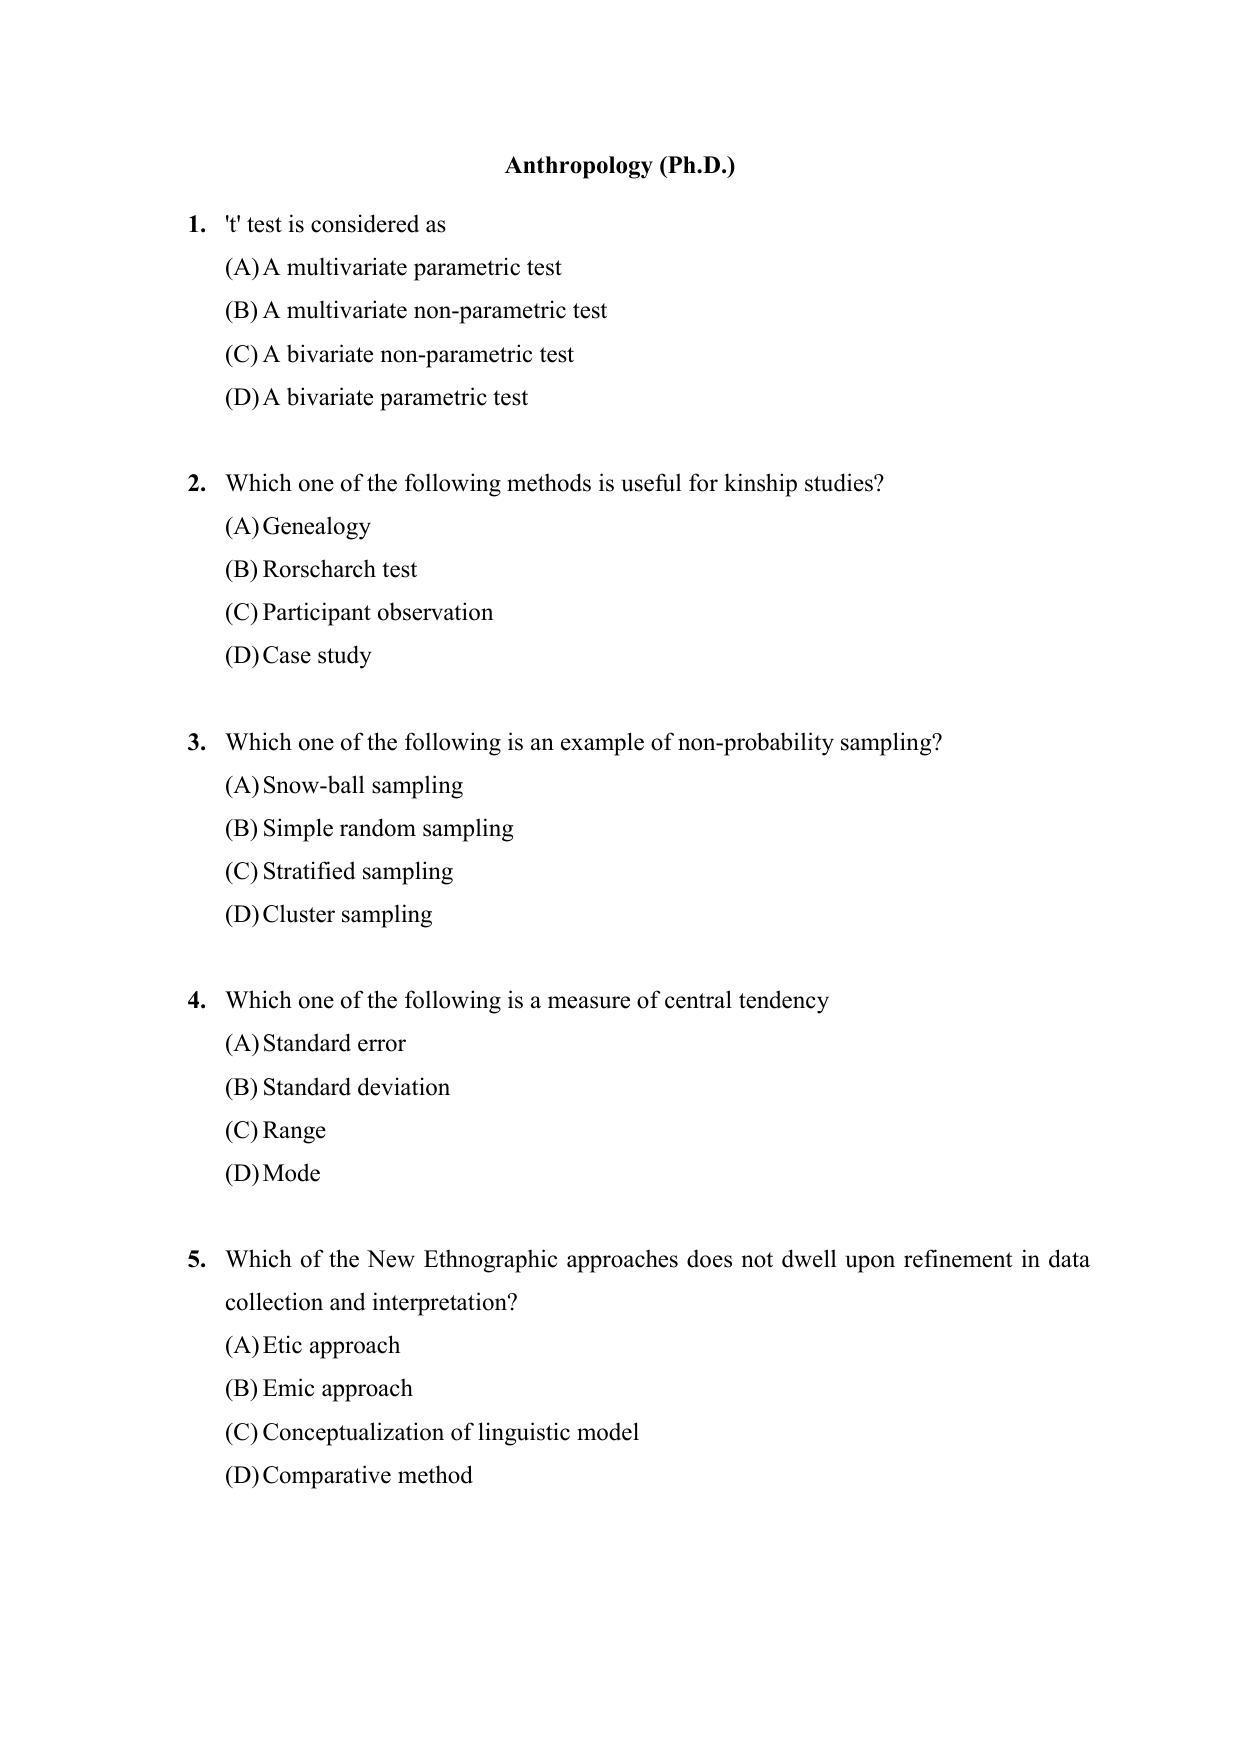 PU MPET Anthropology 2022 Question Papers - Page 1